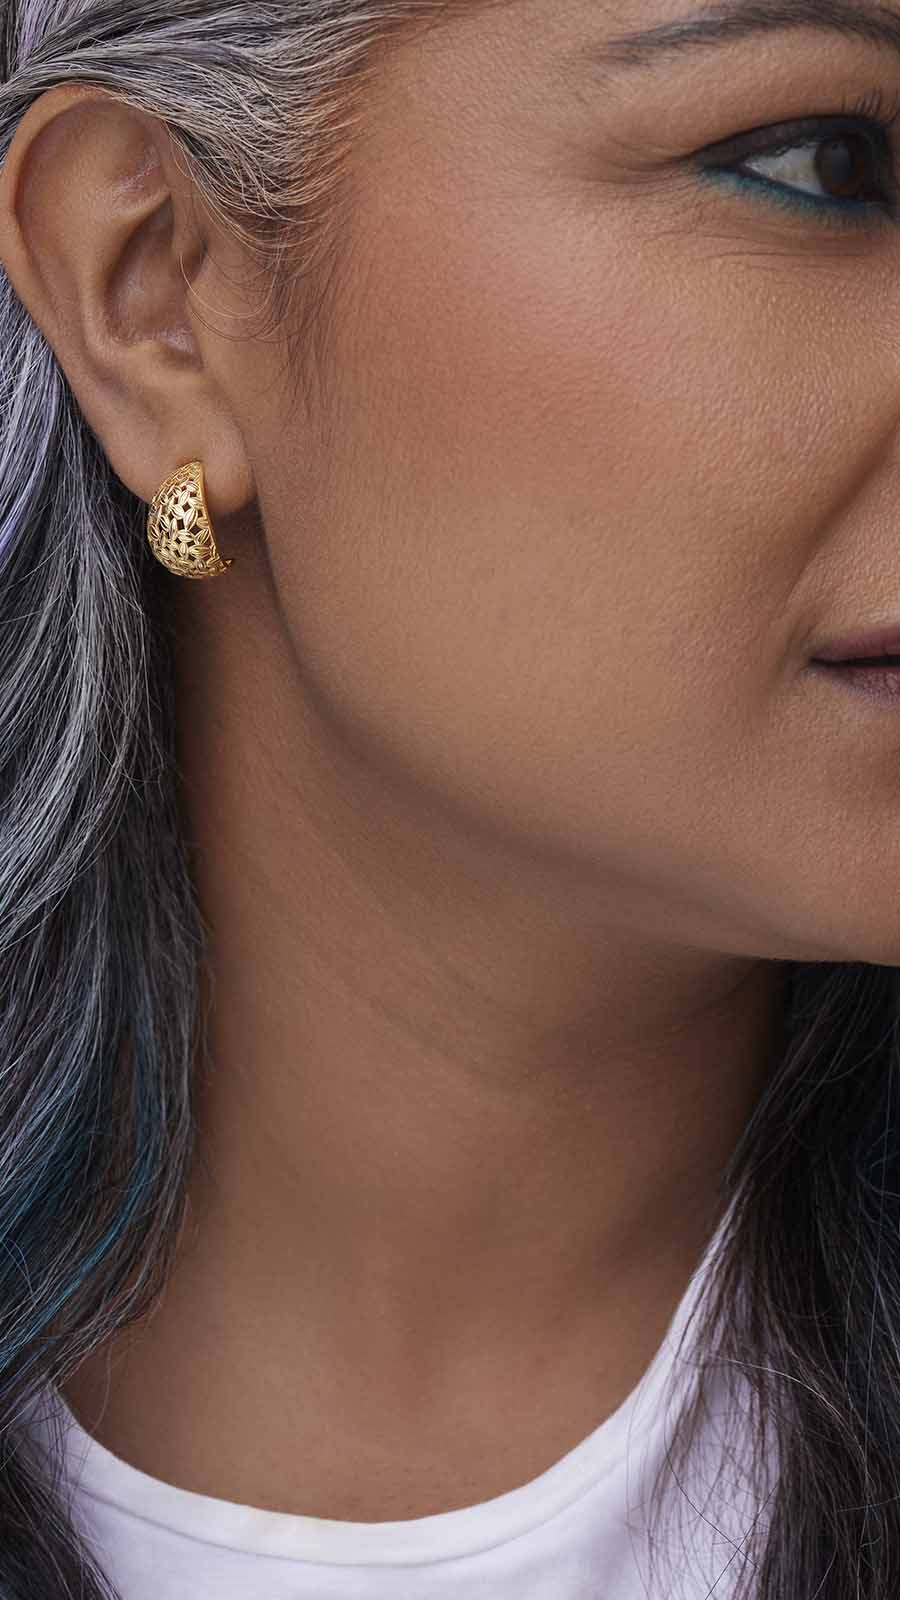 Zoomed picture of an Indian working woman wearing hope earrings